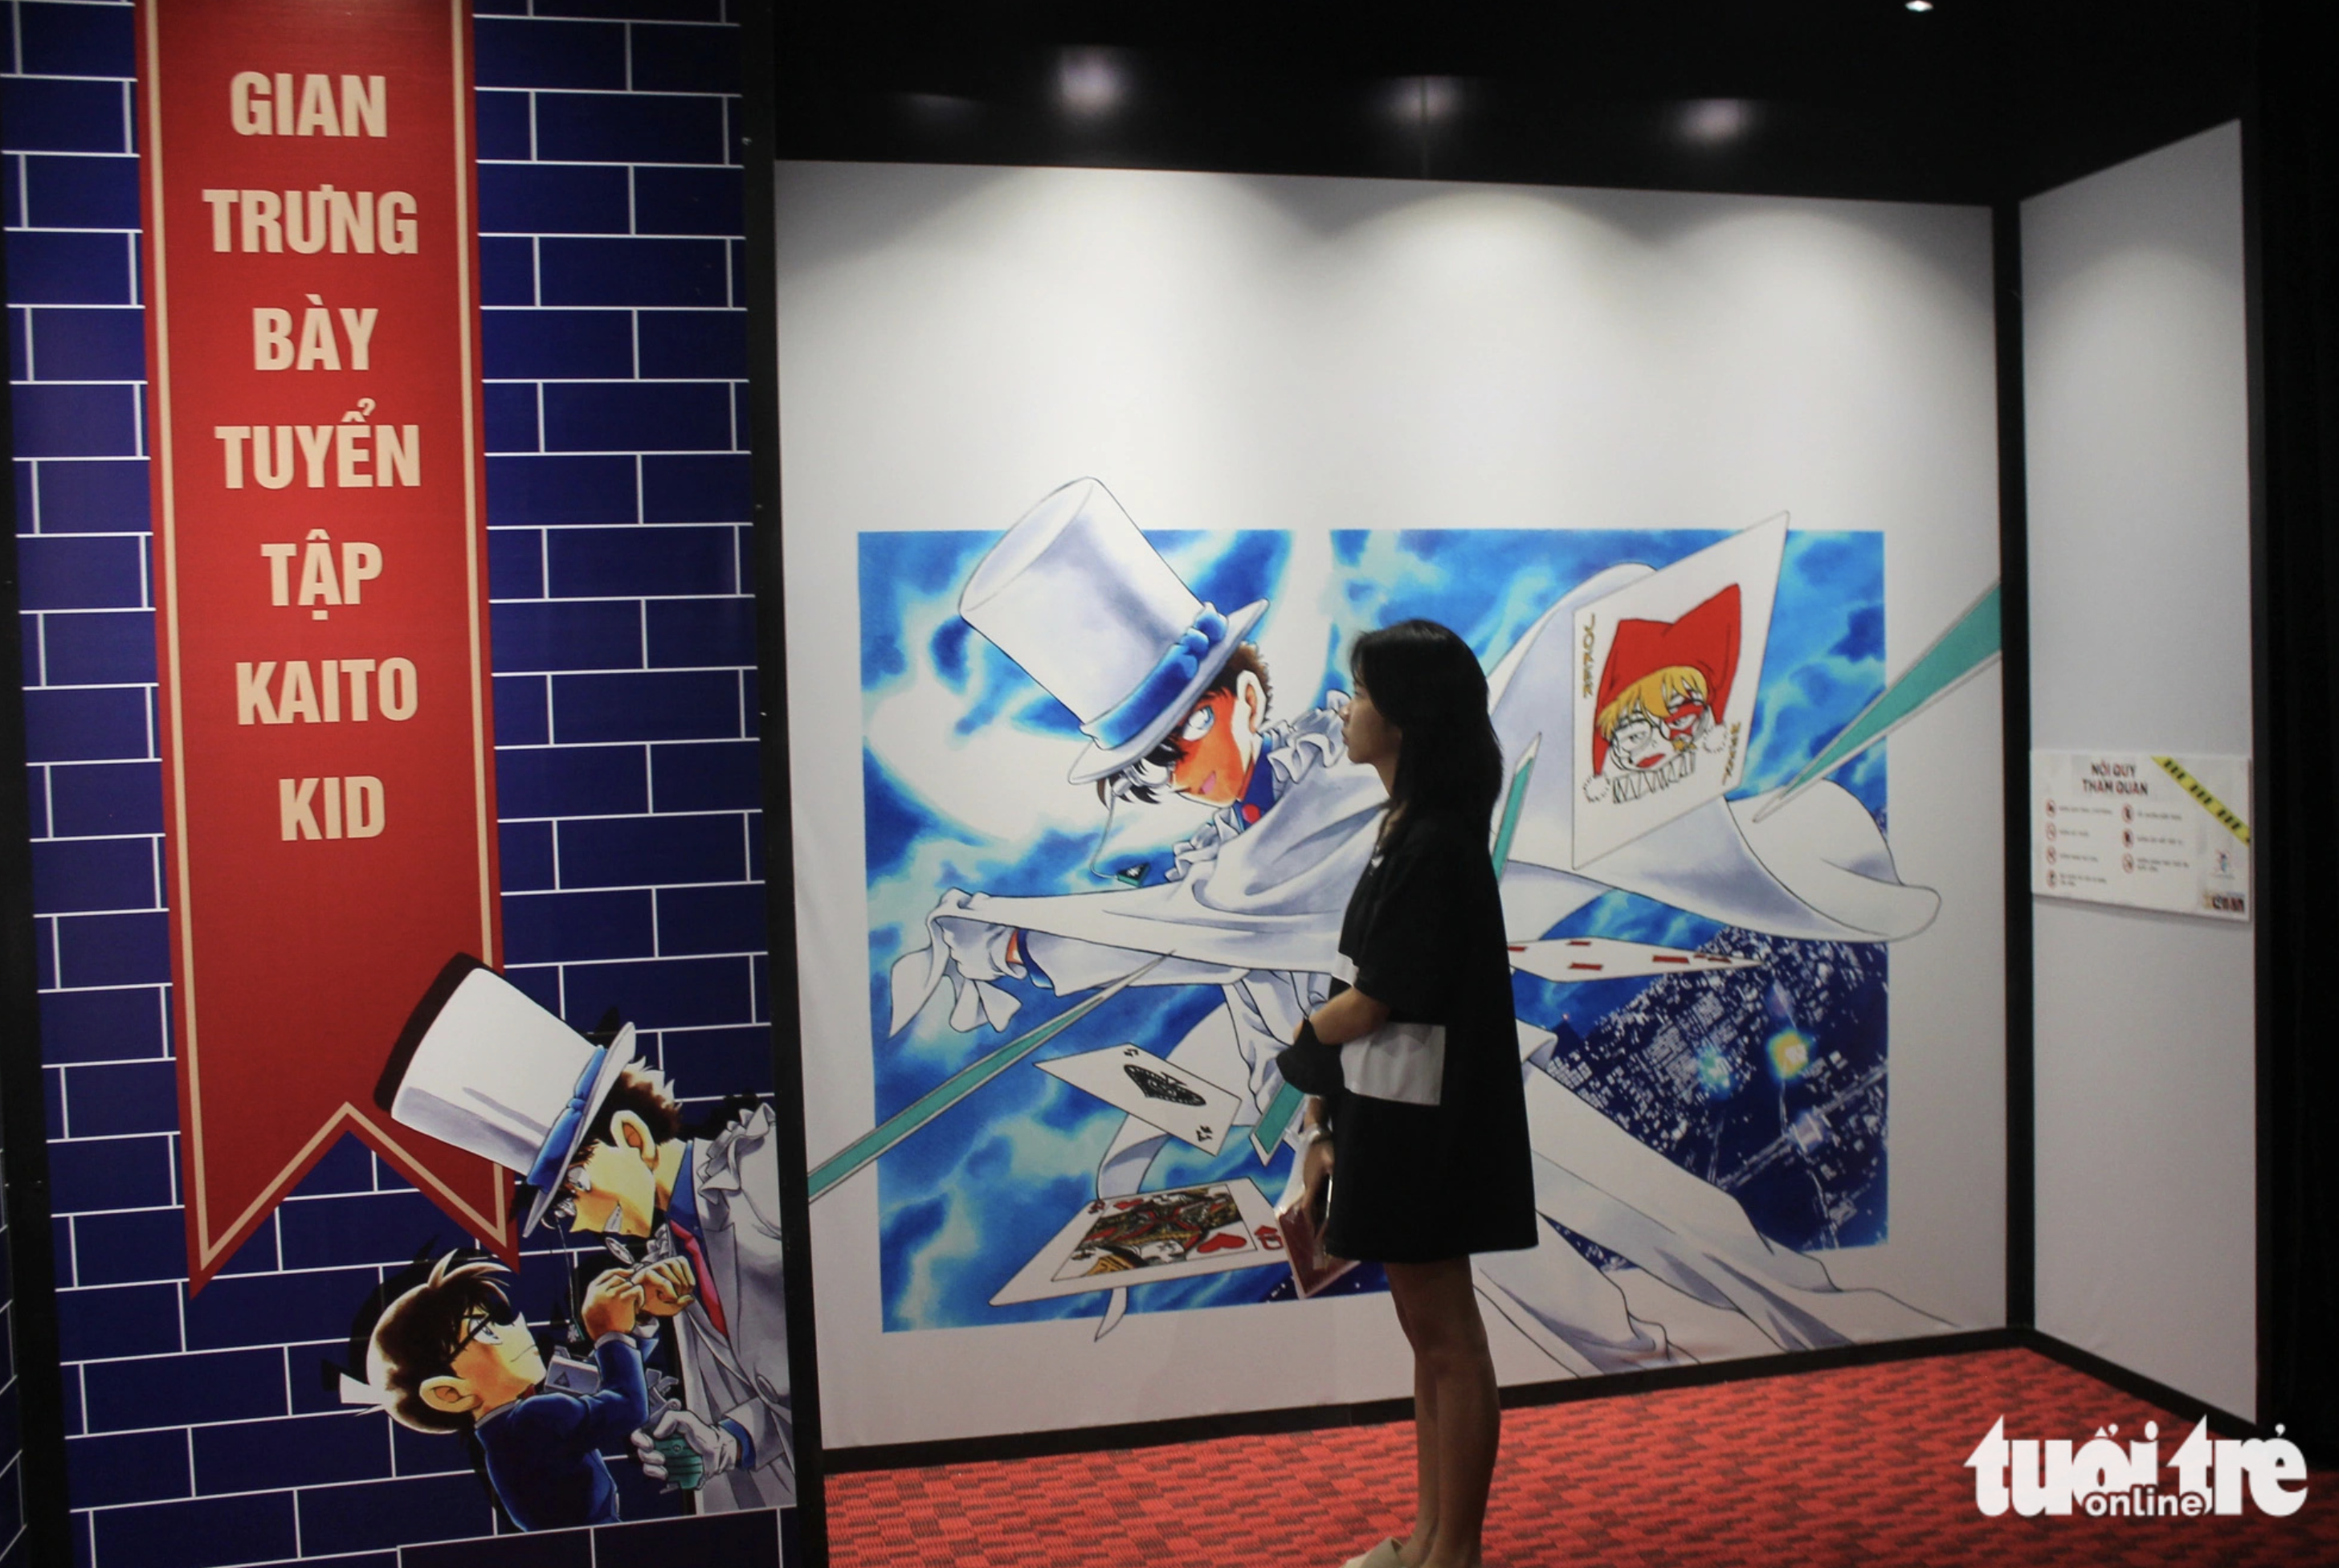 A separate display space for thief Kaito Kid at the exhibition. Photo: To Cuong / Tuoi Tre